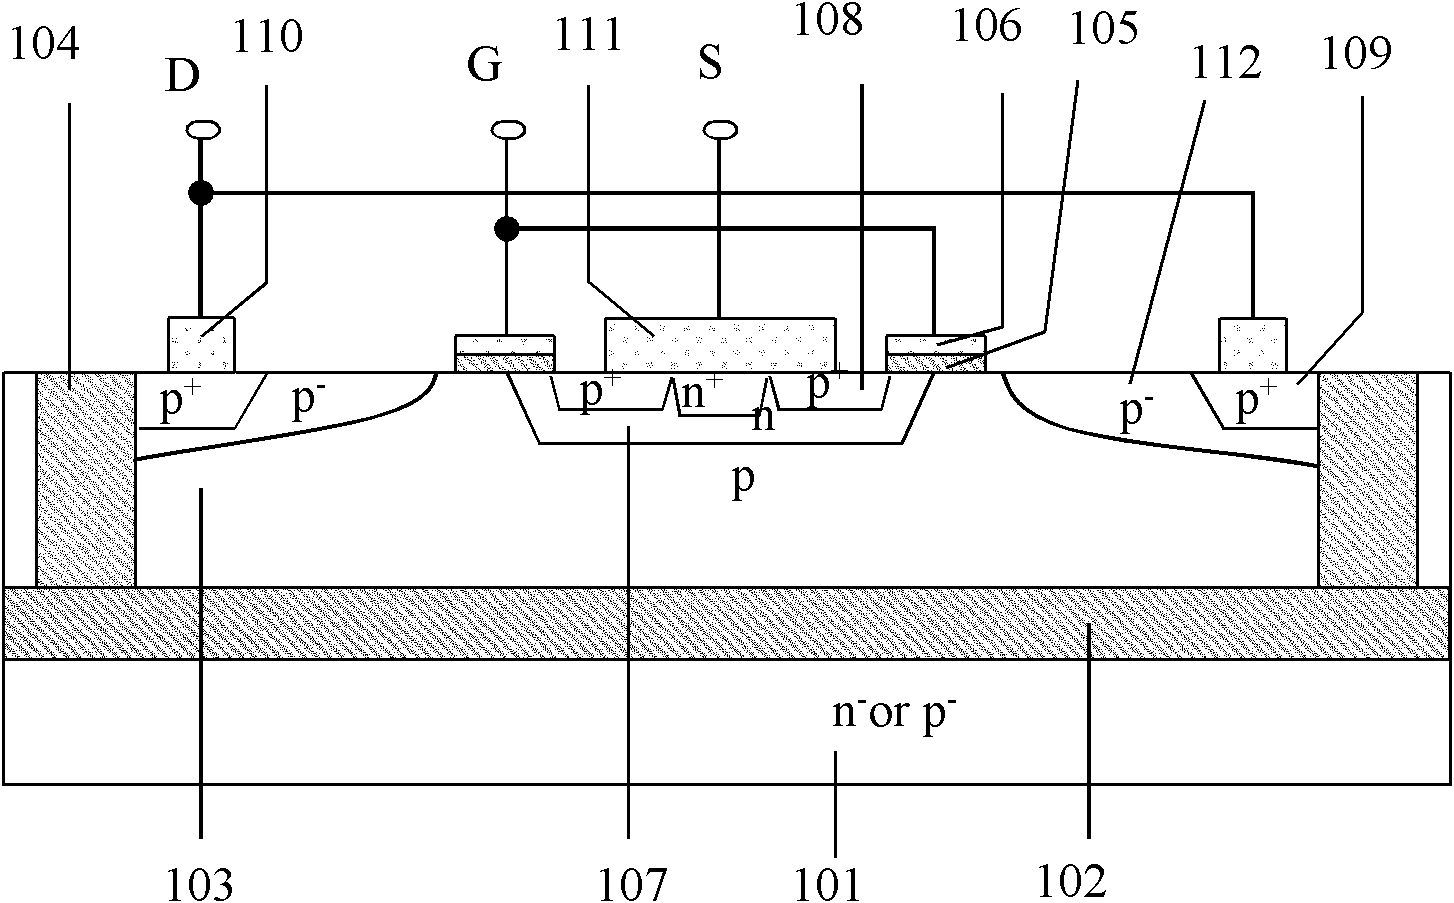 SOI (Silicon On Insulator) type P-LDMOS (Lateral Diffused Metal-Oxide Semiconductor)